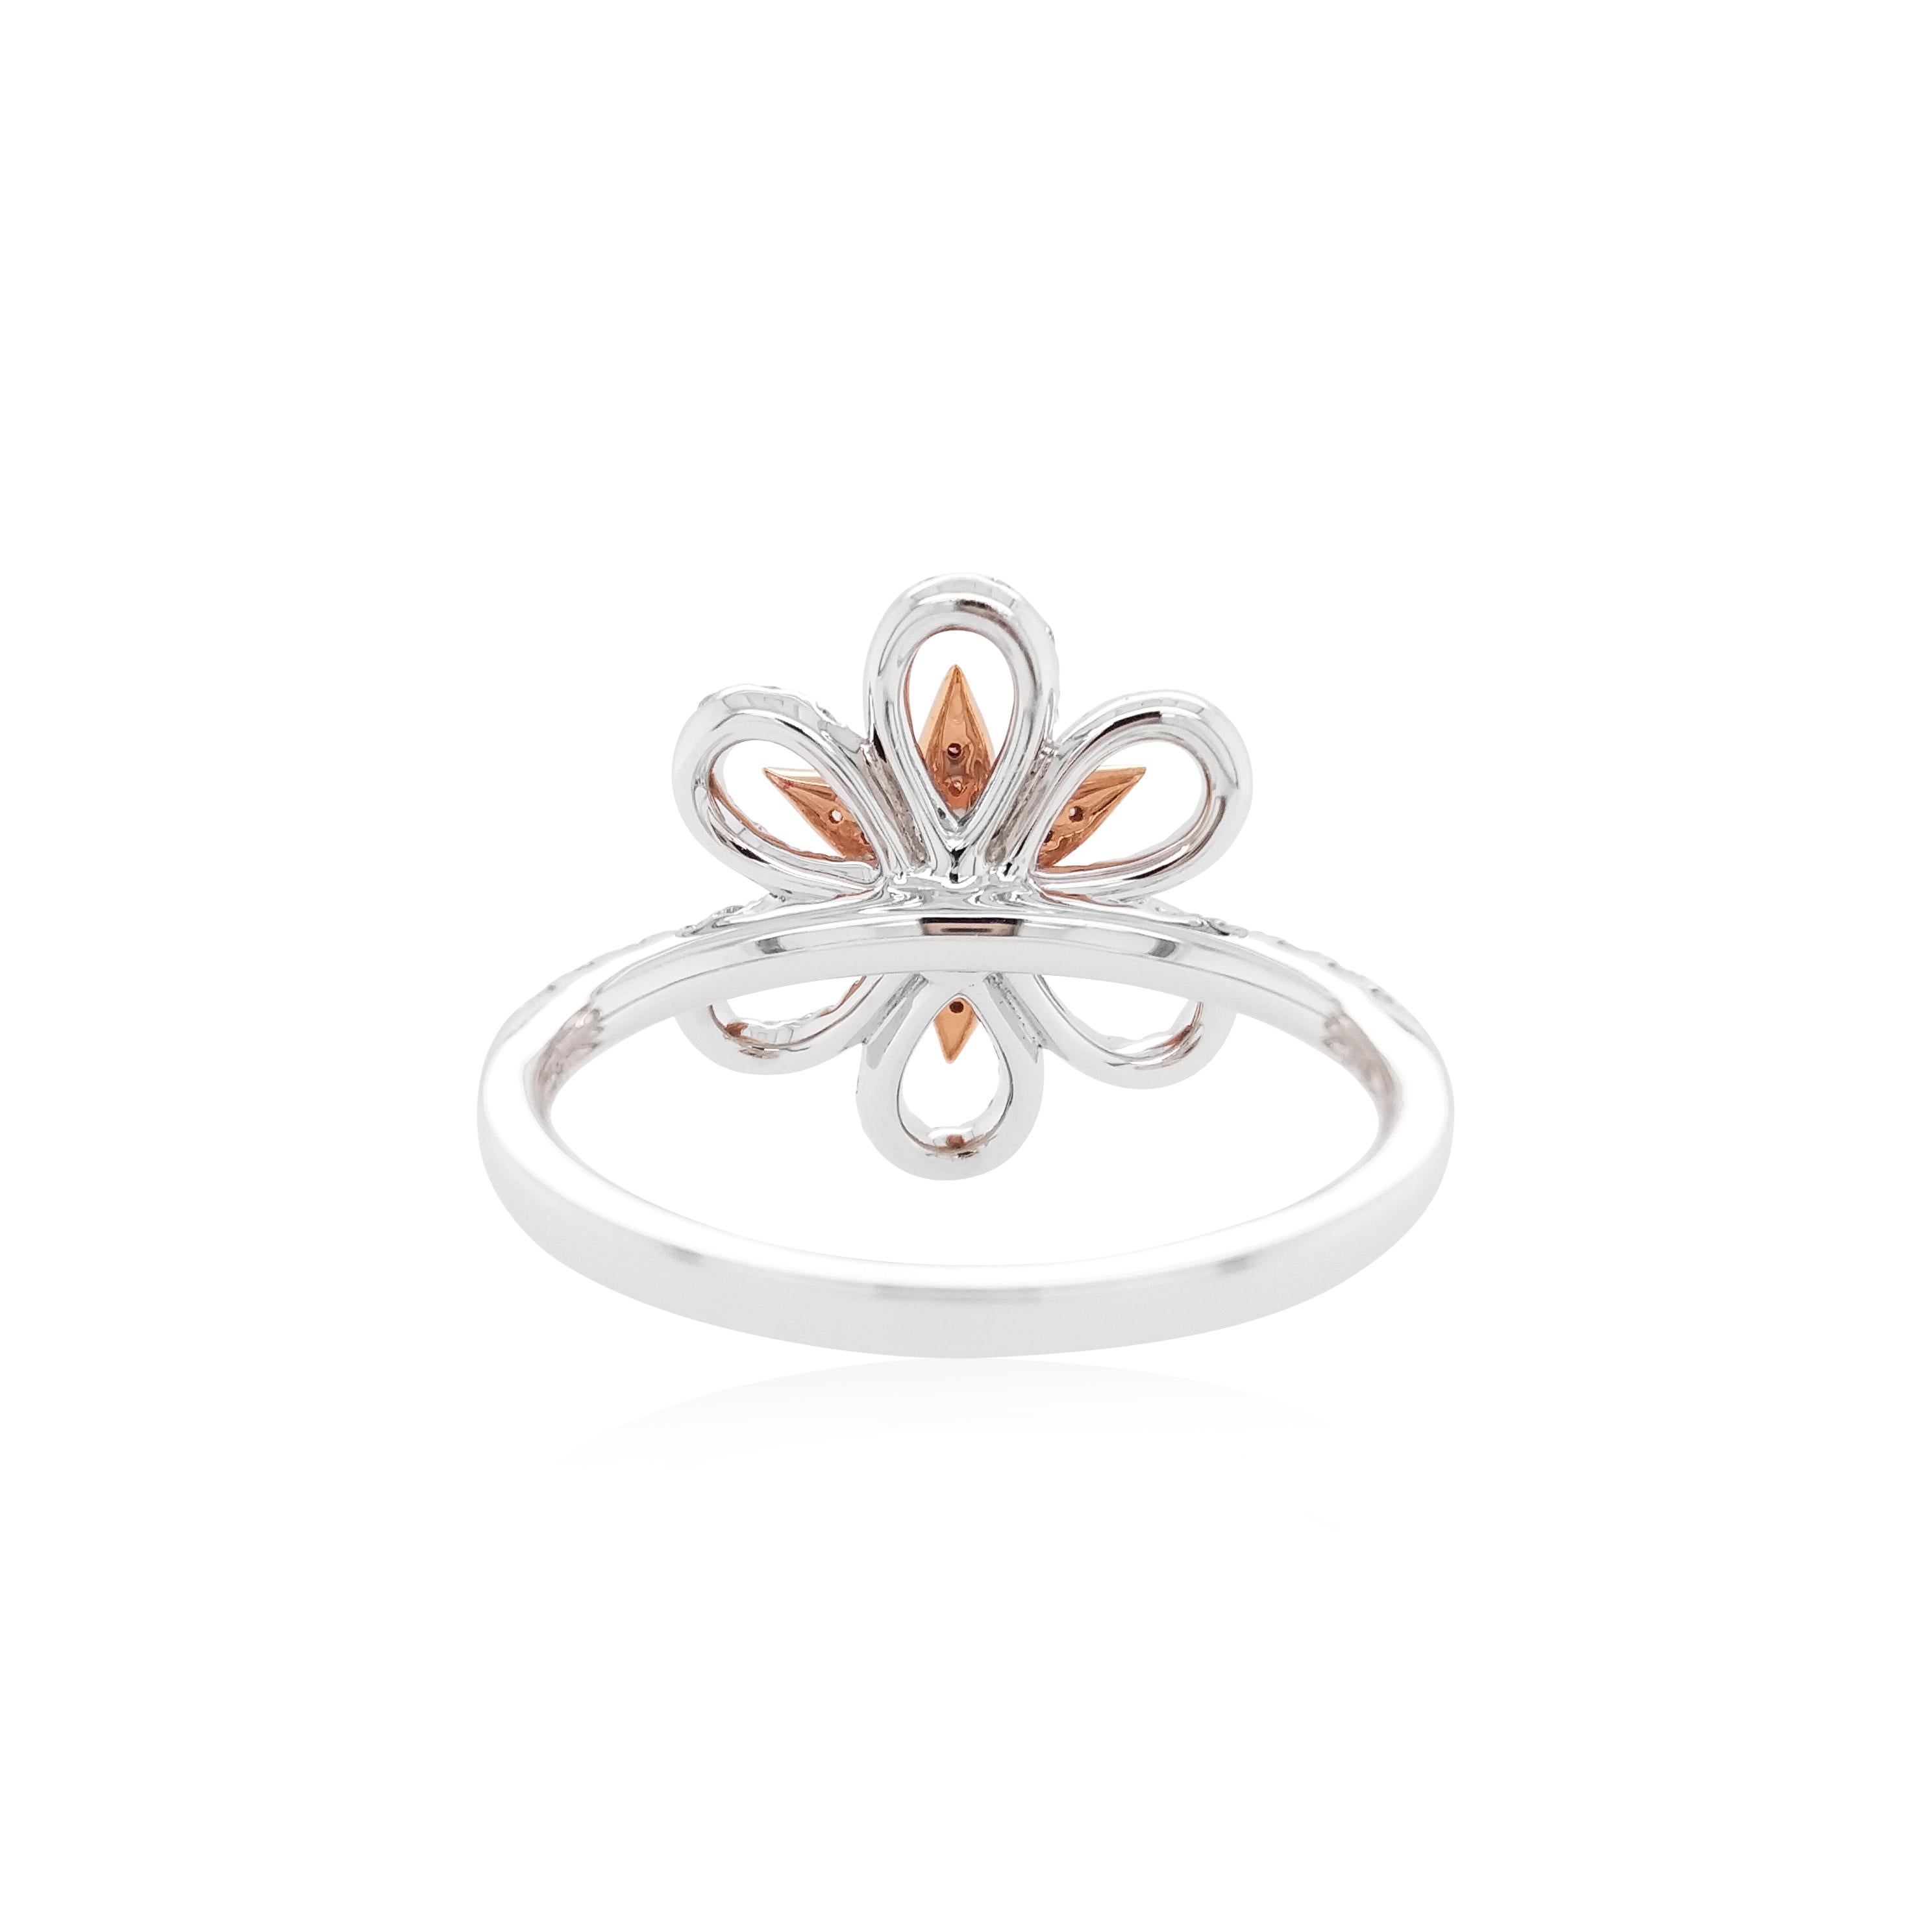 This mesmeric platinum ring features natural Argyle pink diamonds at its forefront, accentuated by the white diamonds floral motif which surrounds it. Bold, yet intricate, this one-of-a-kind ring will add a sumptuous touch of colour to your